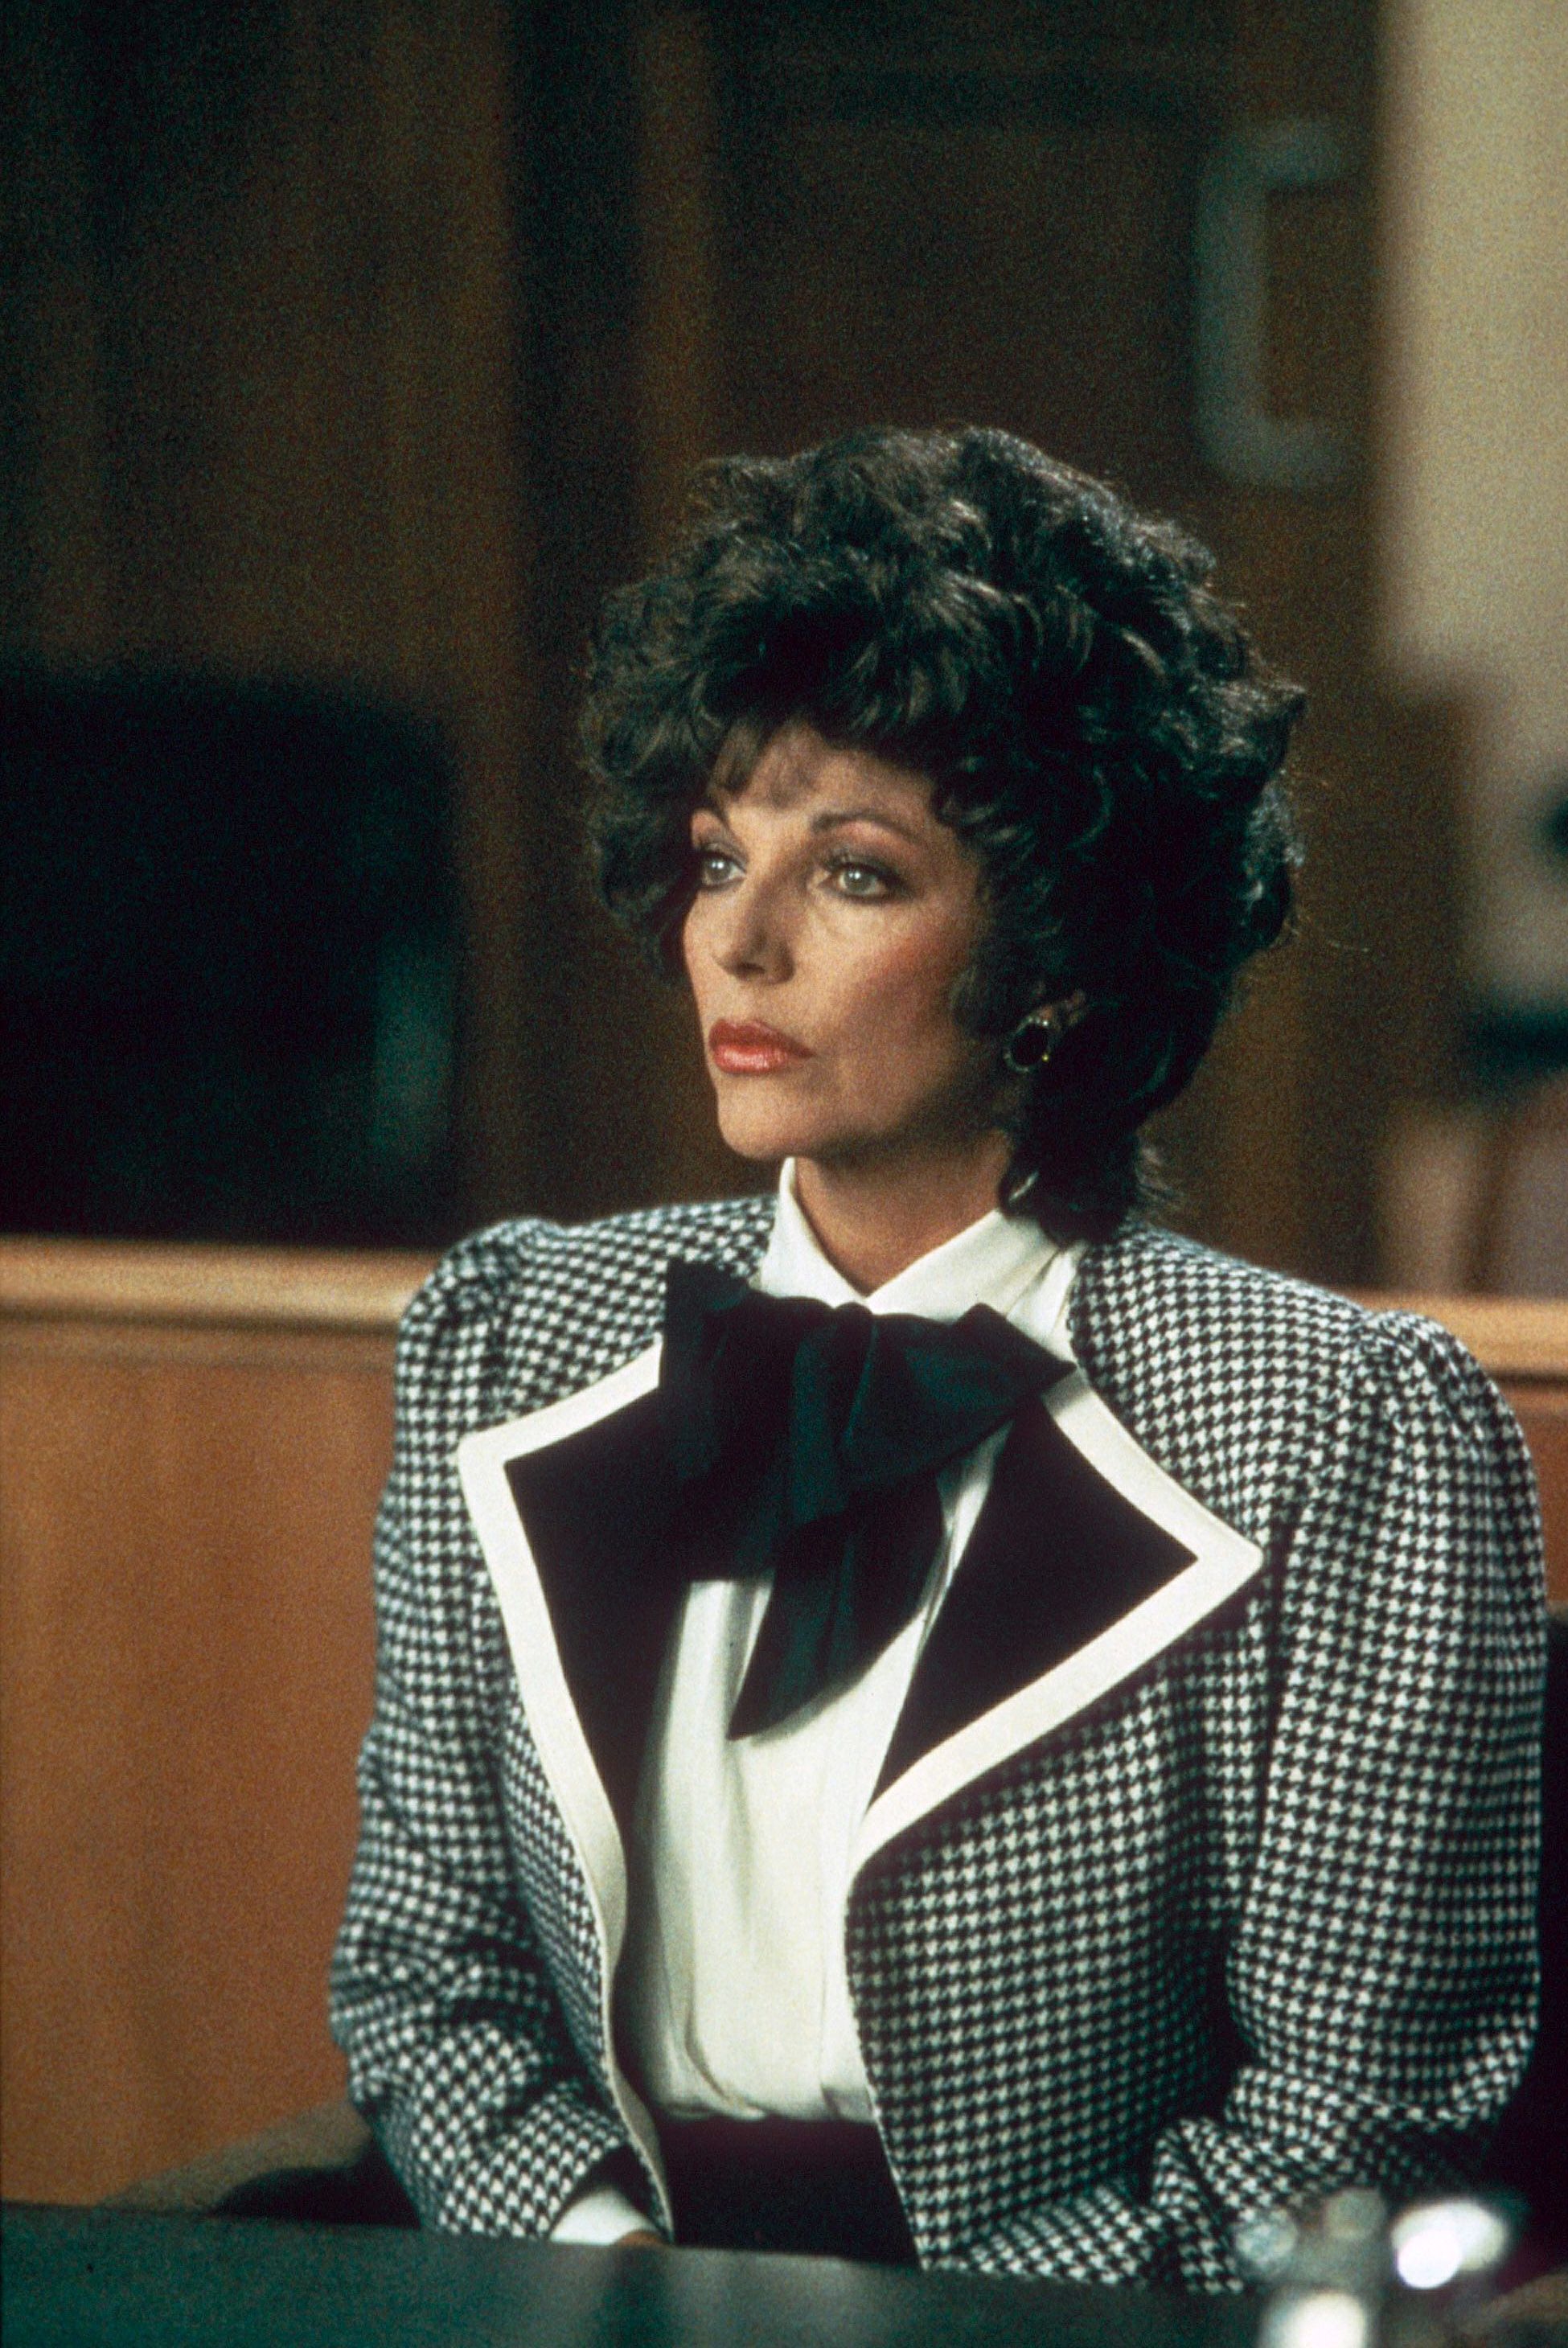 Of collins pictures joan Joan Collins